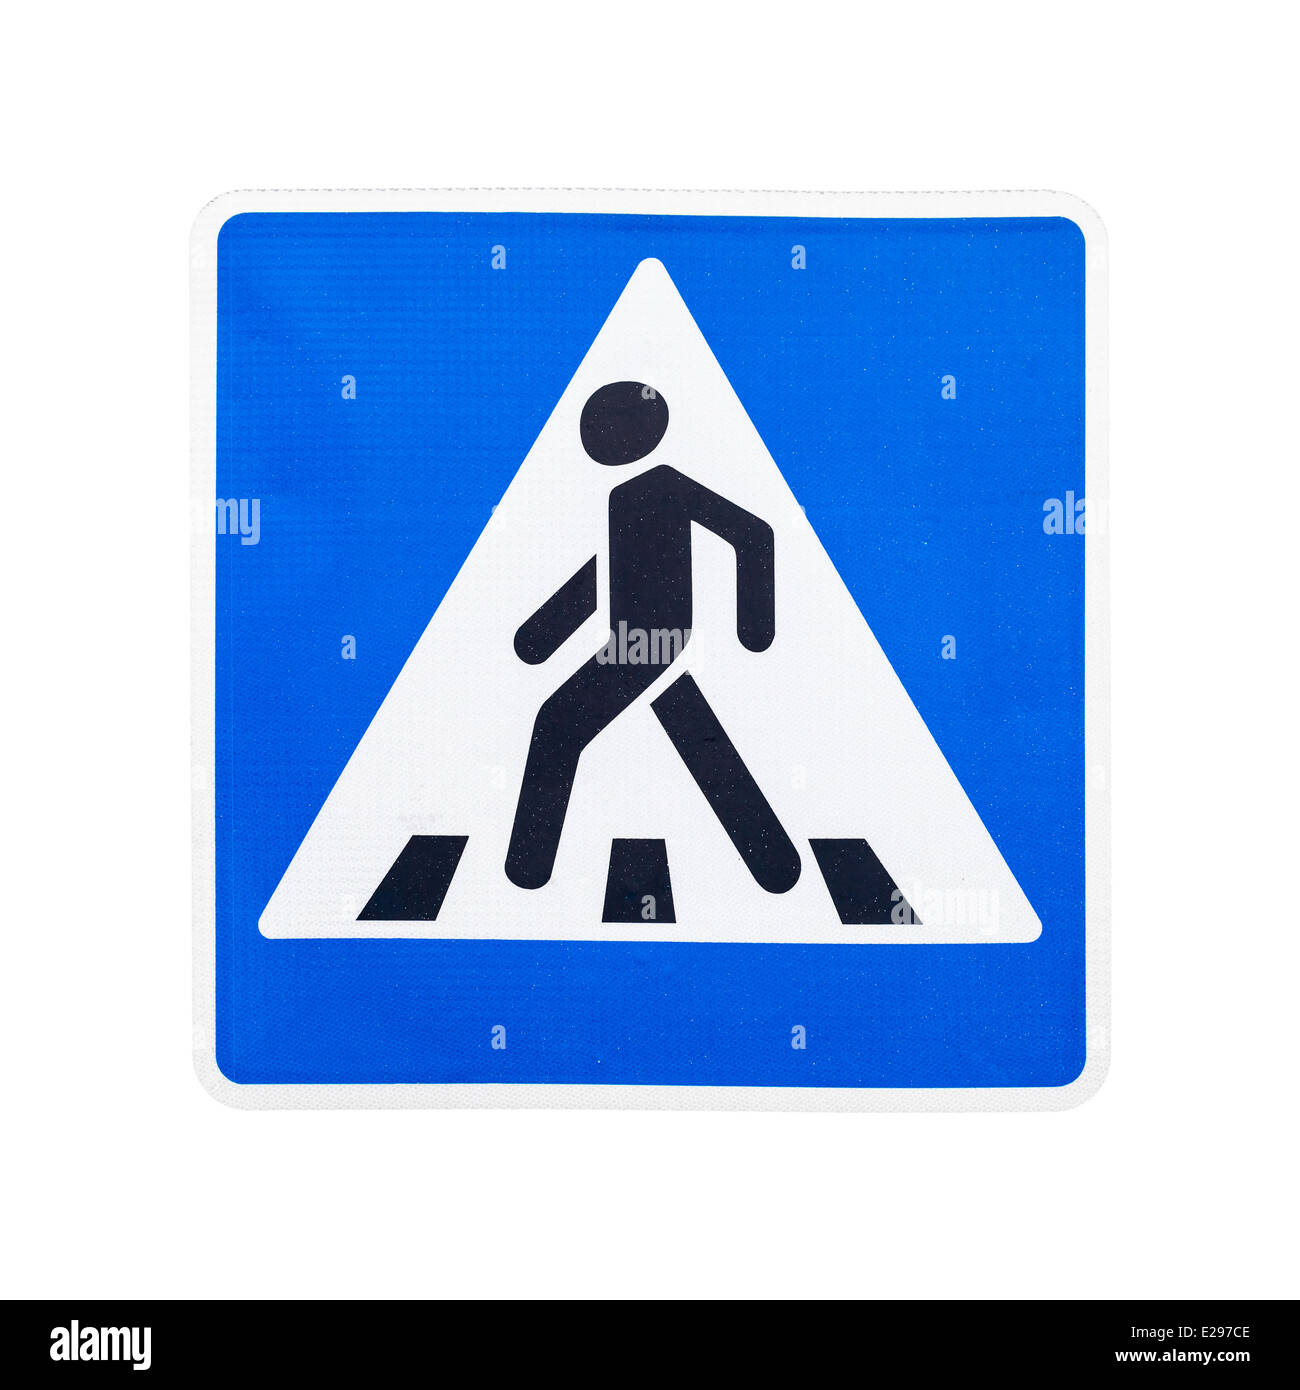 Modern square pedestrian crossing road sign isolated on white Stock Photo